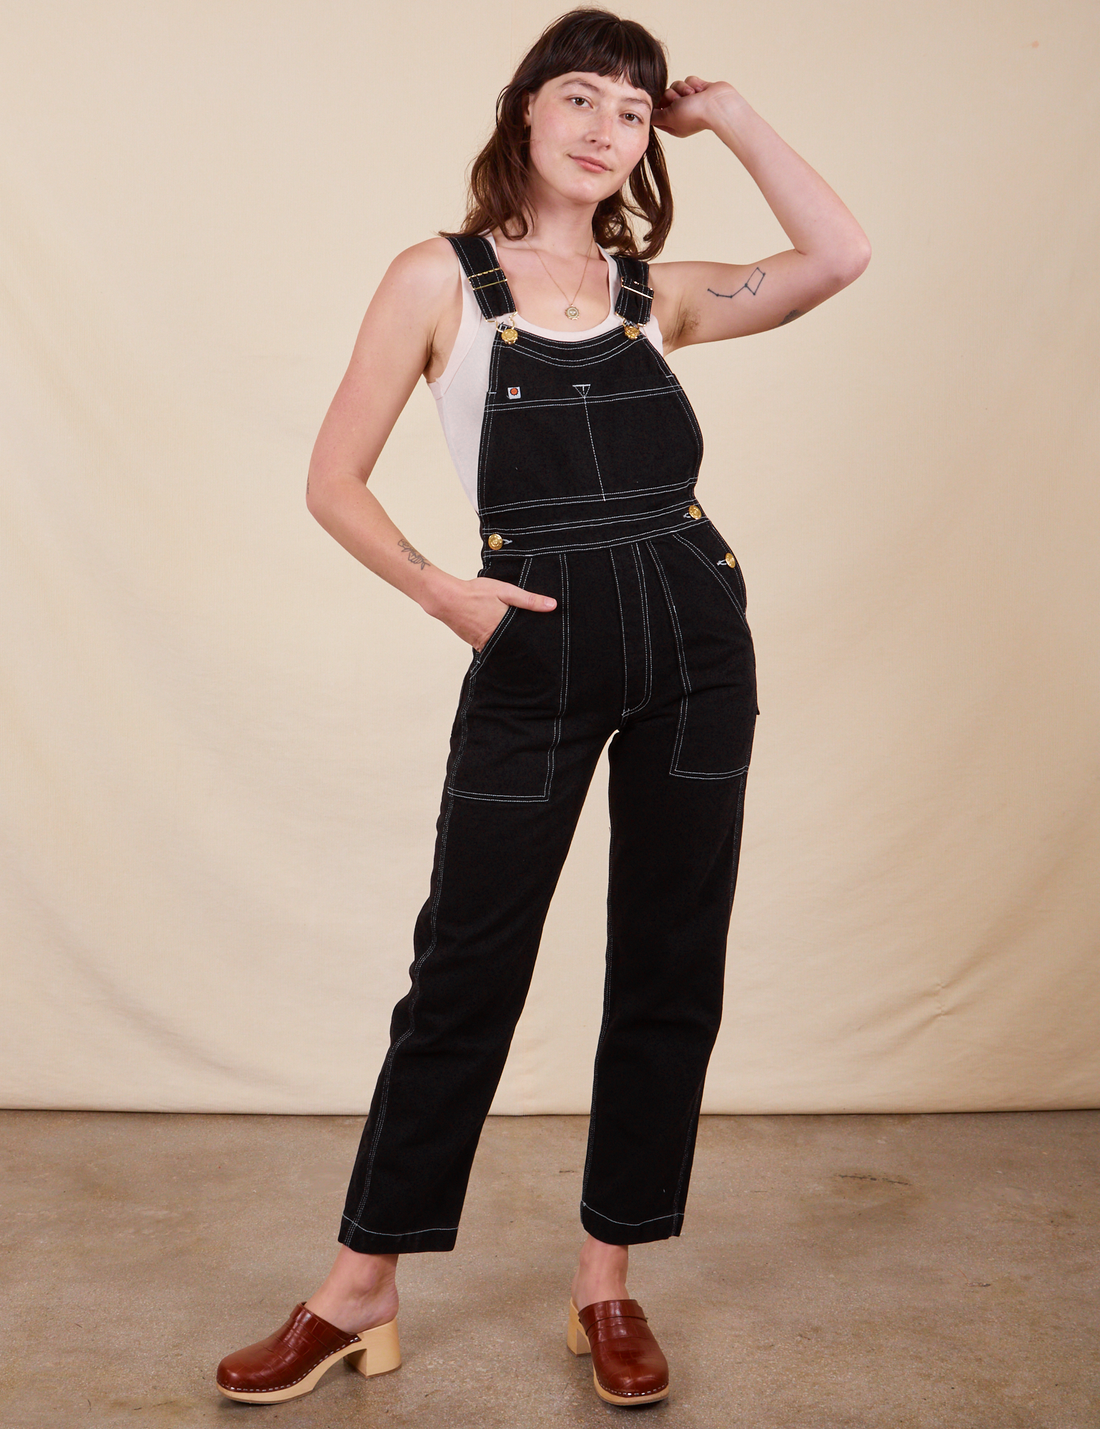 Alex is 5'8"and wearing P Original Overalls in Basic Black